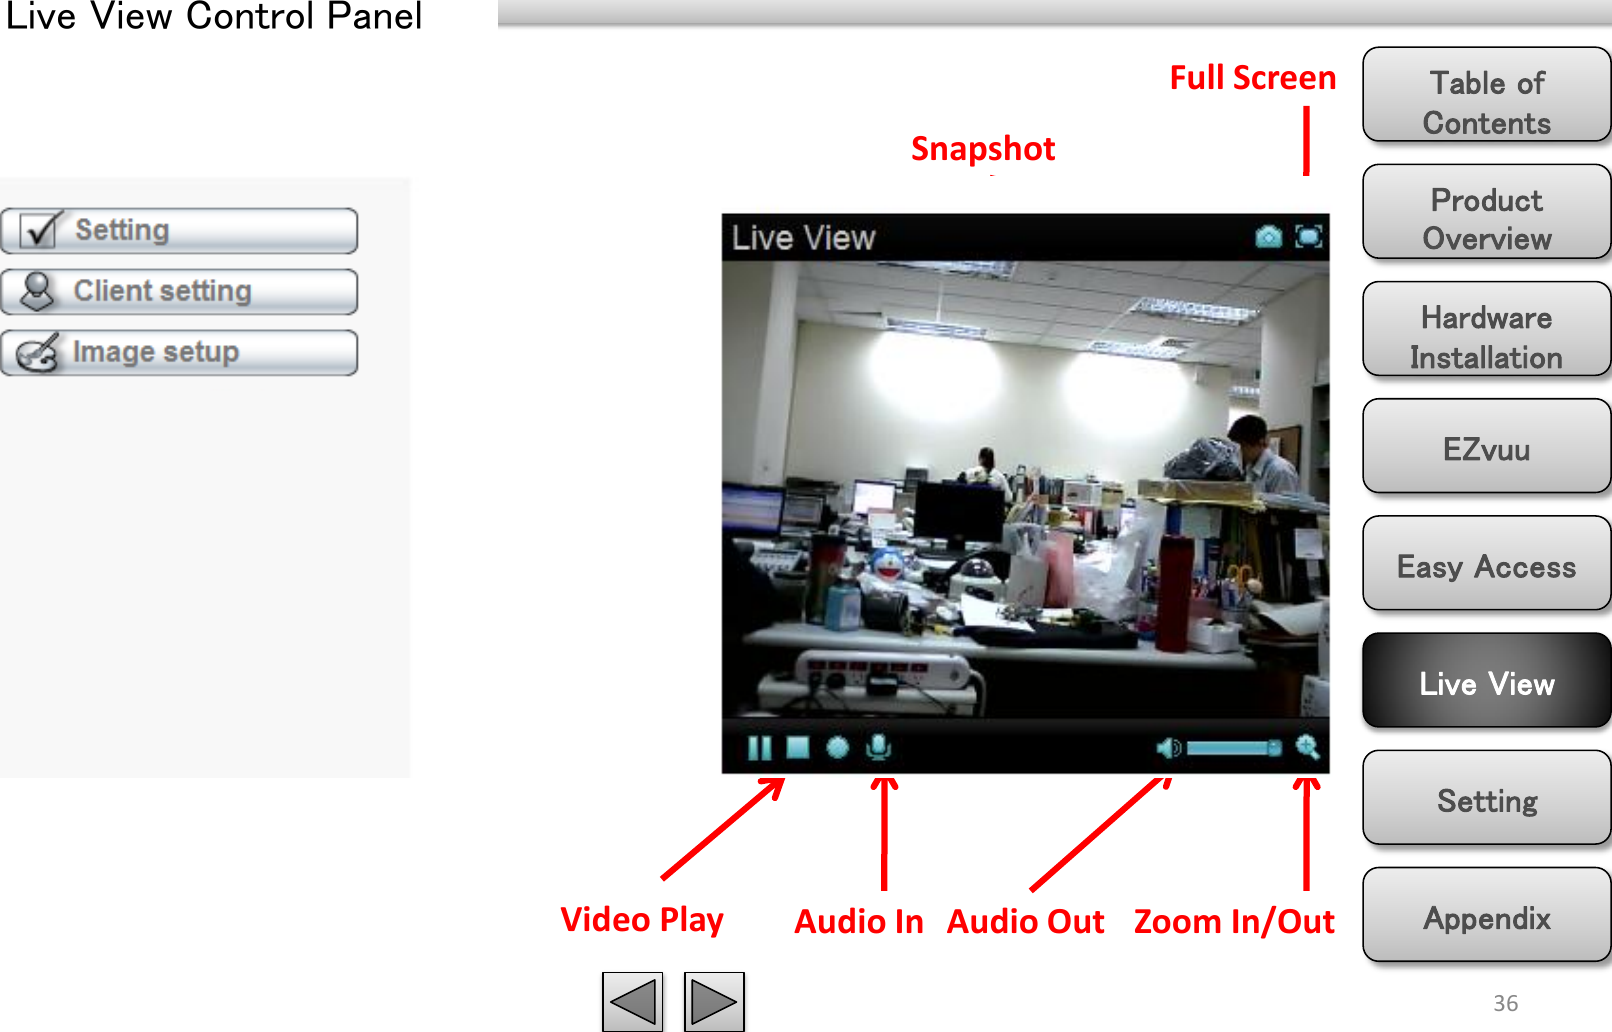 Product Overview Hardware Installation Easy Access EZvuu Setting Live View Appendix Table of Contents Live View Control Panel 36 Zoom In/Out Video Play  Audio In  Audio Out Snapshot Full Screen 